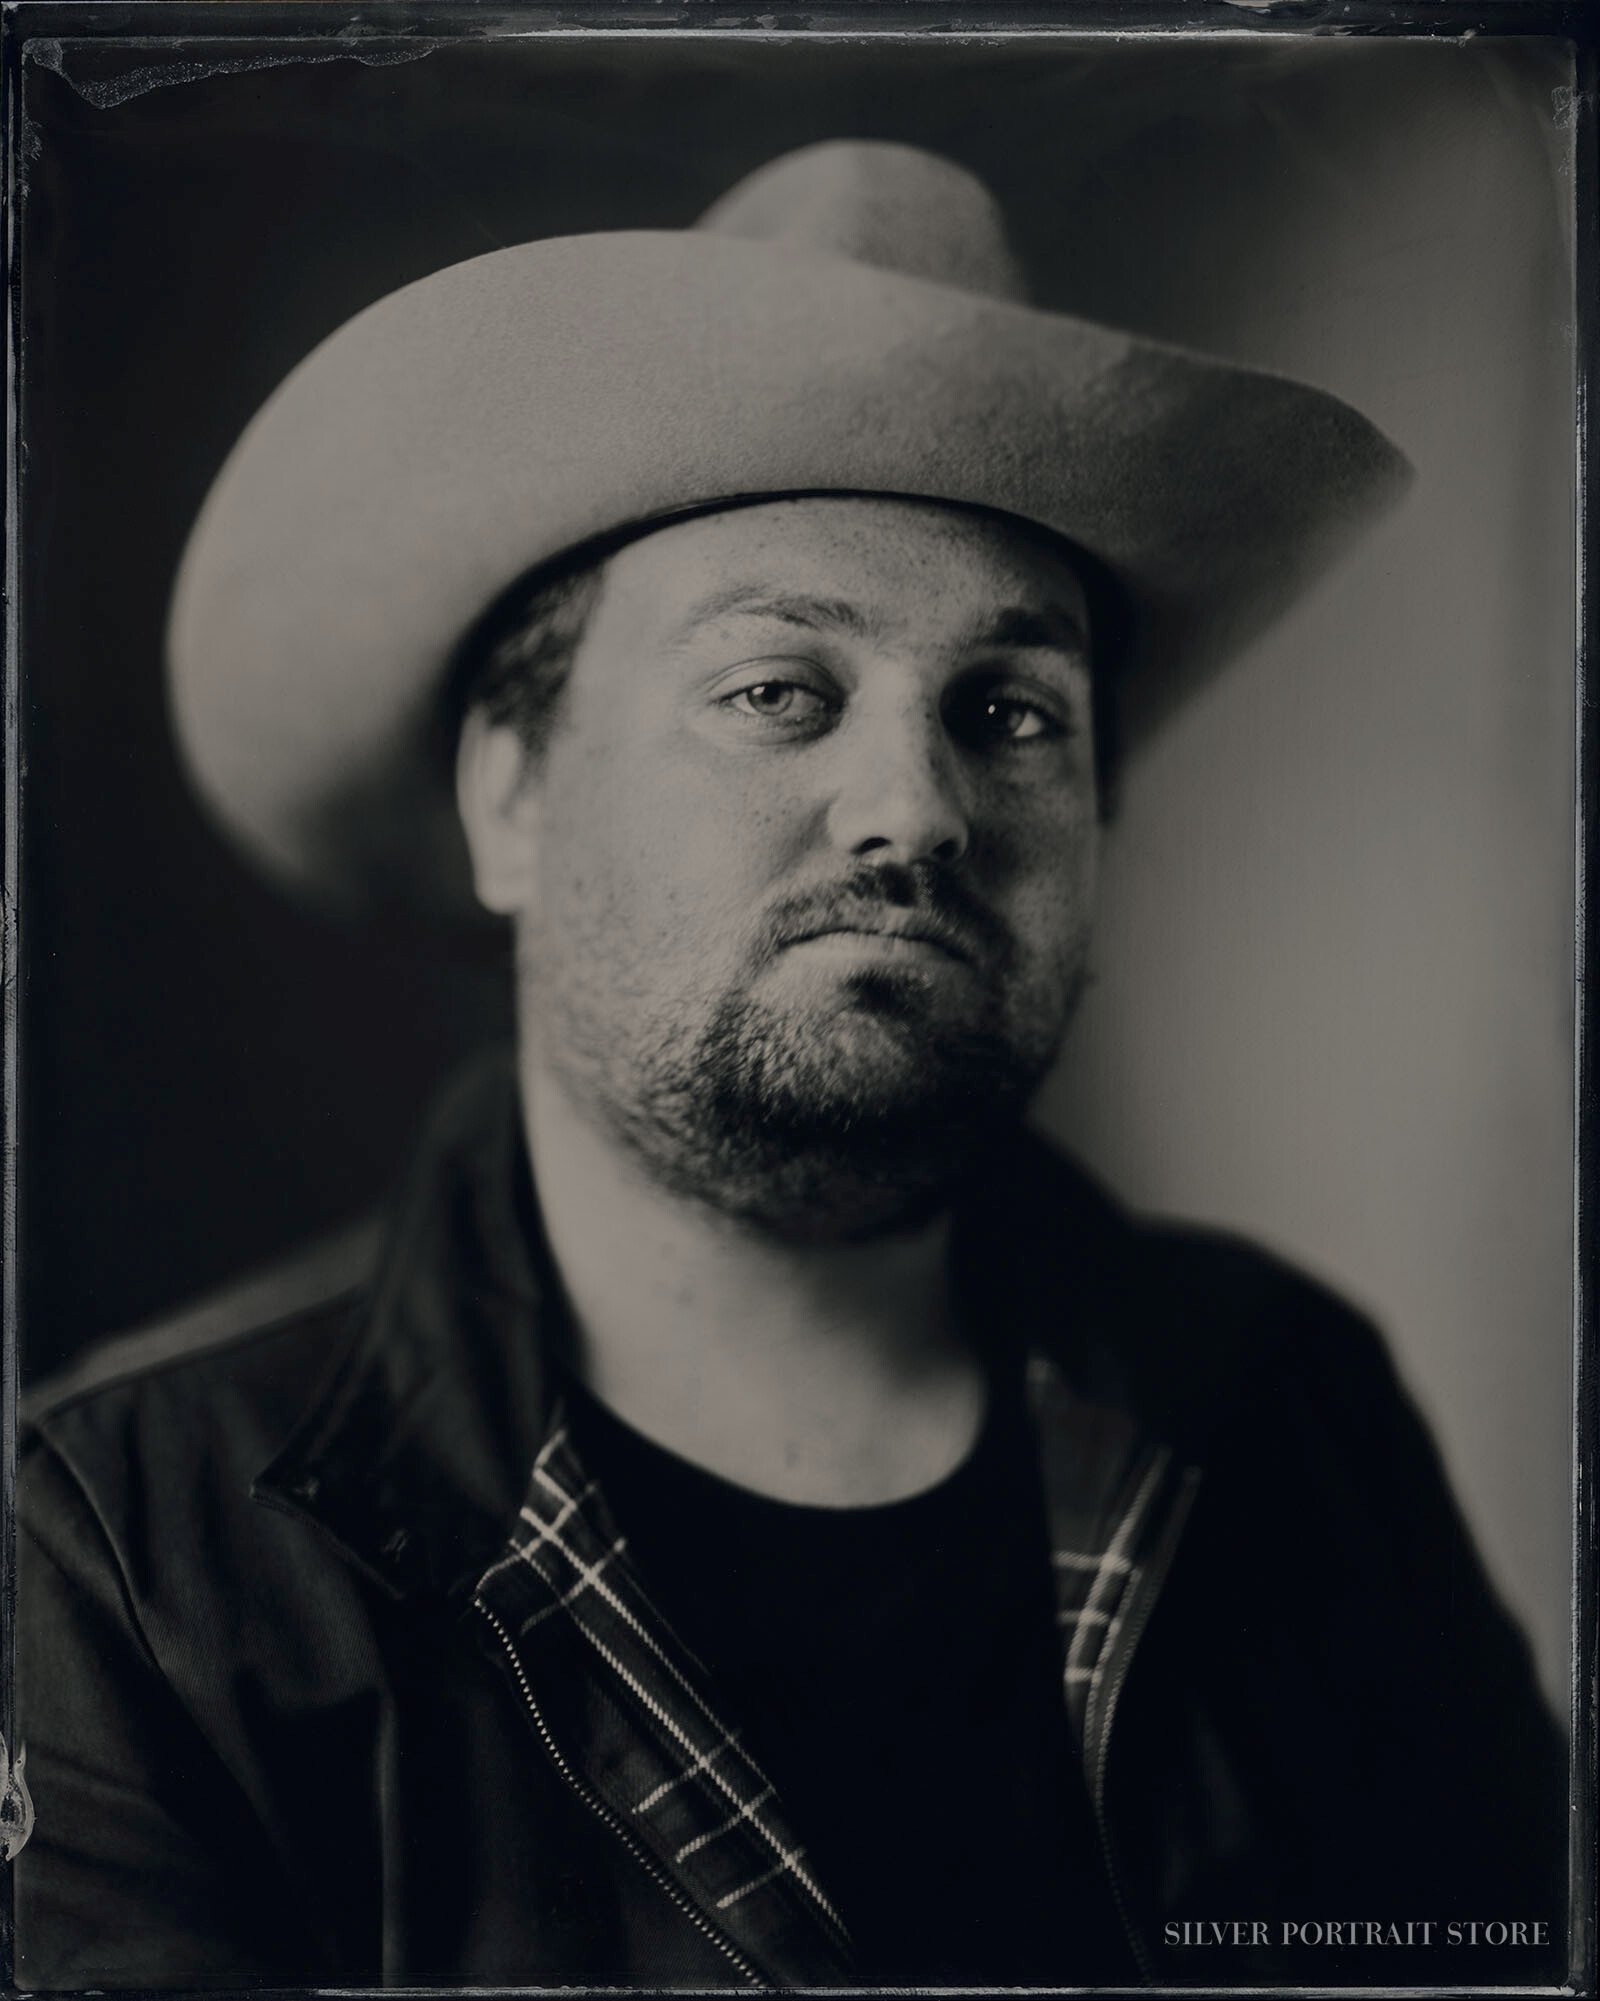 Tim Knol-Musician-Silver Portrait Store-Scan from Wet plate collodion-Tintype 20 x 25 cm.